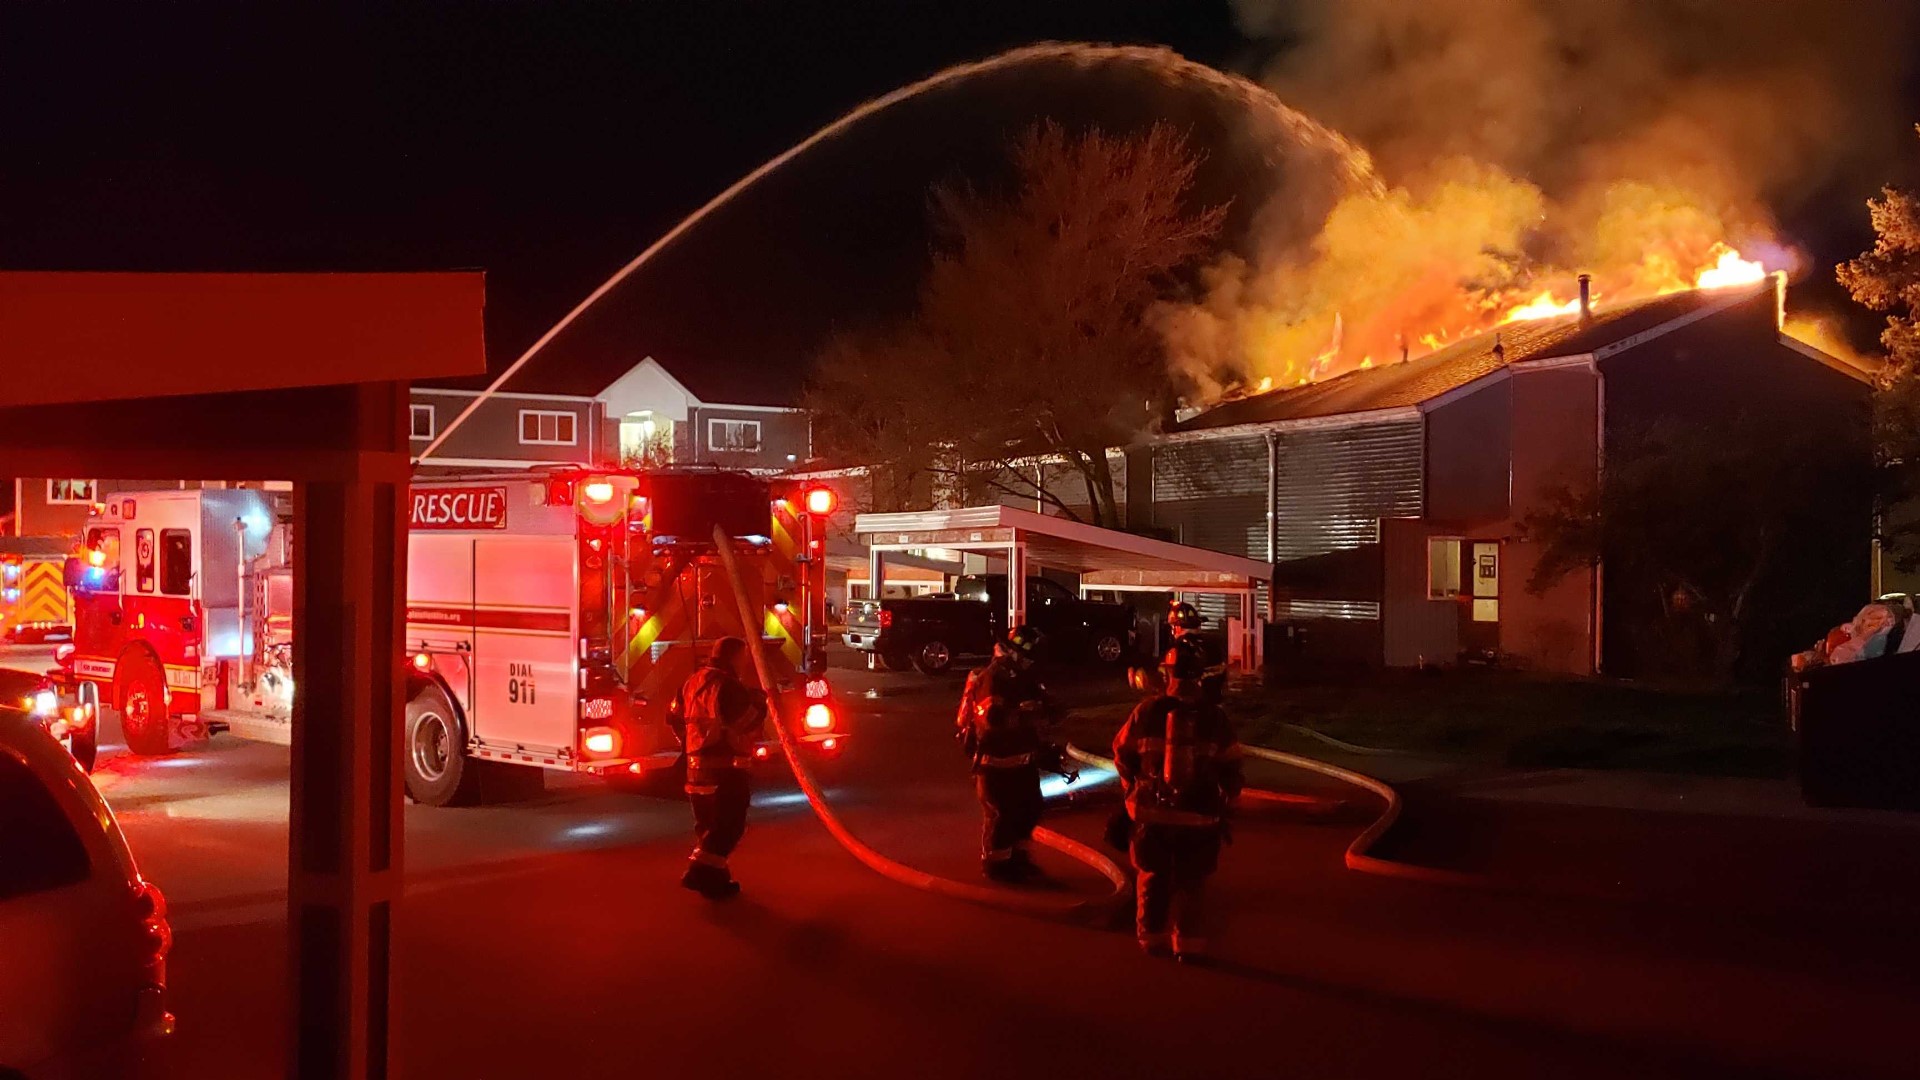 A townhome community in Grand Rapids was badly damaged in a fire early Tuesday morning.